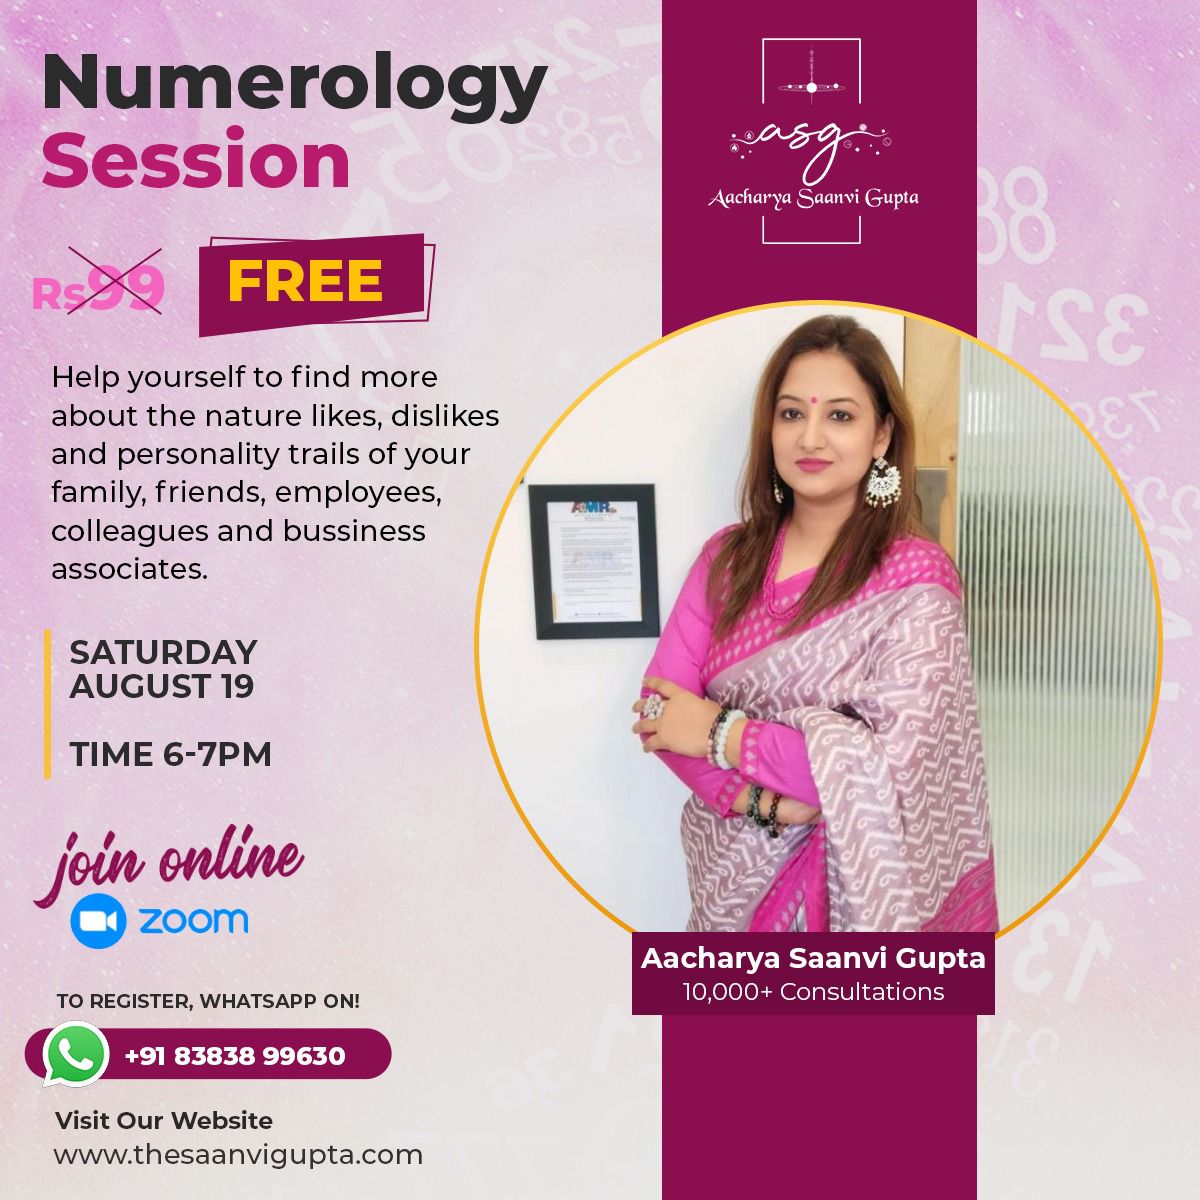 Numerology Session, Online Event